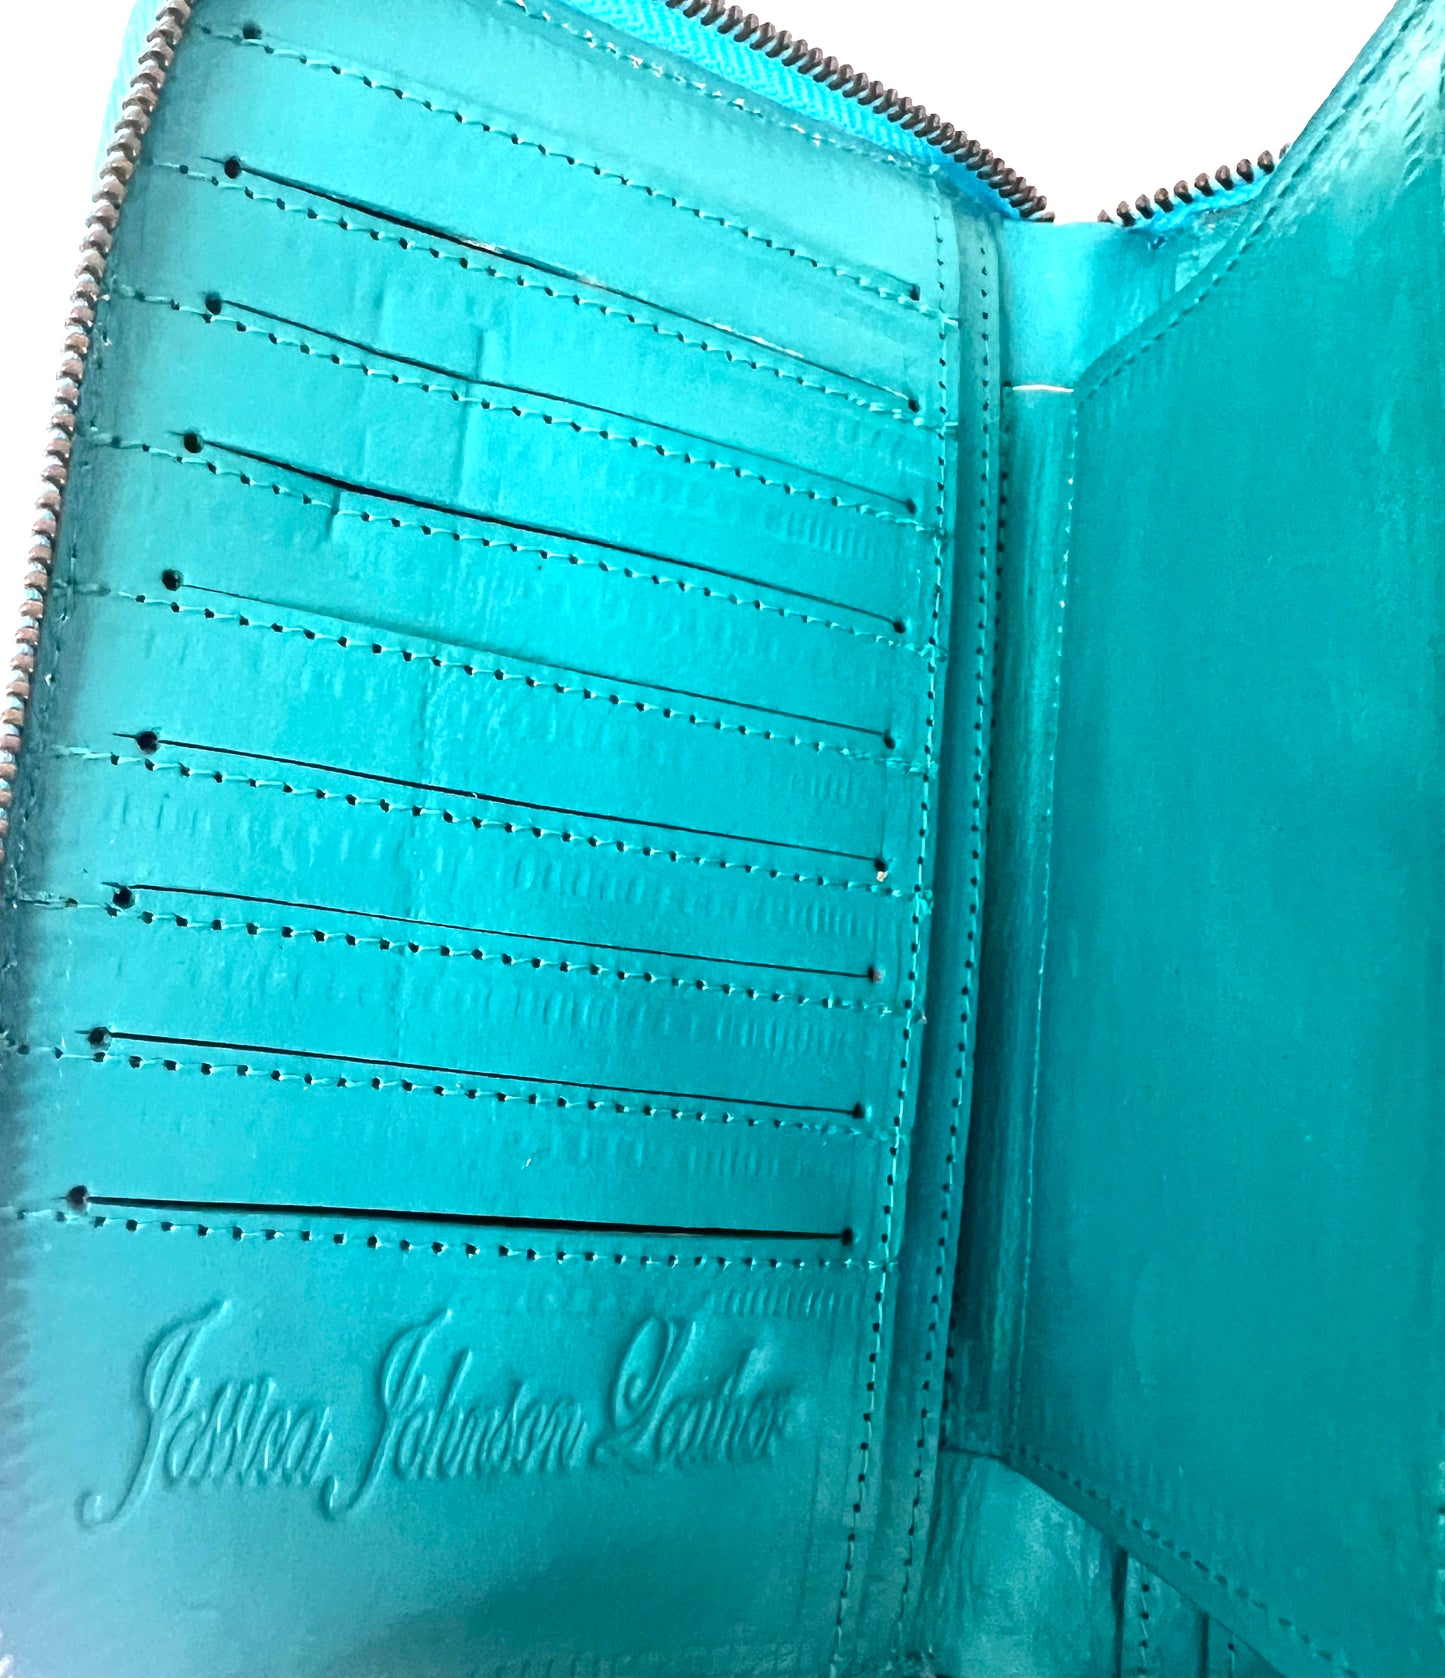 Atlantis leather wallet in marine colour way